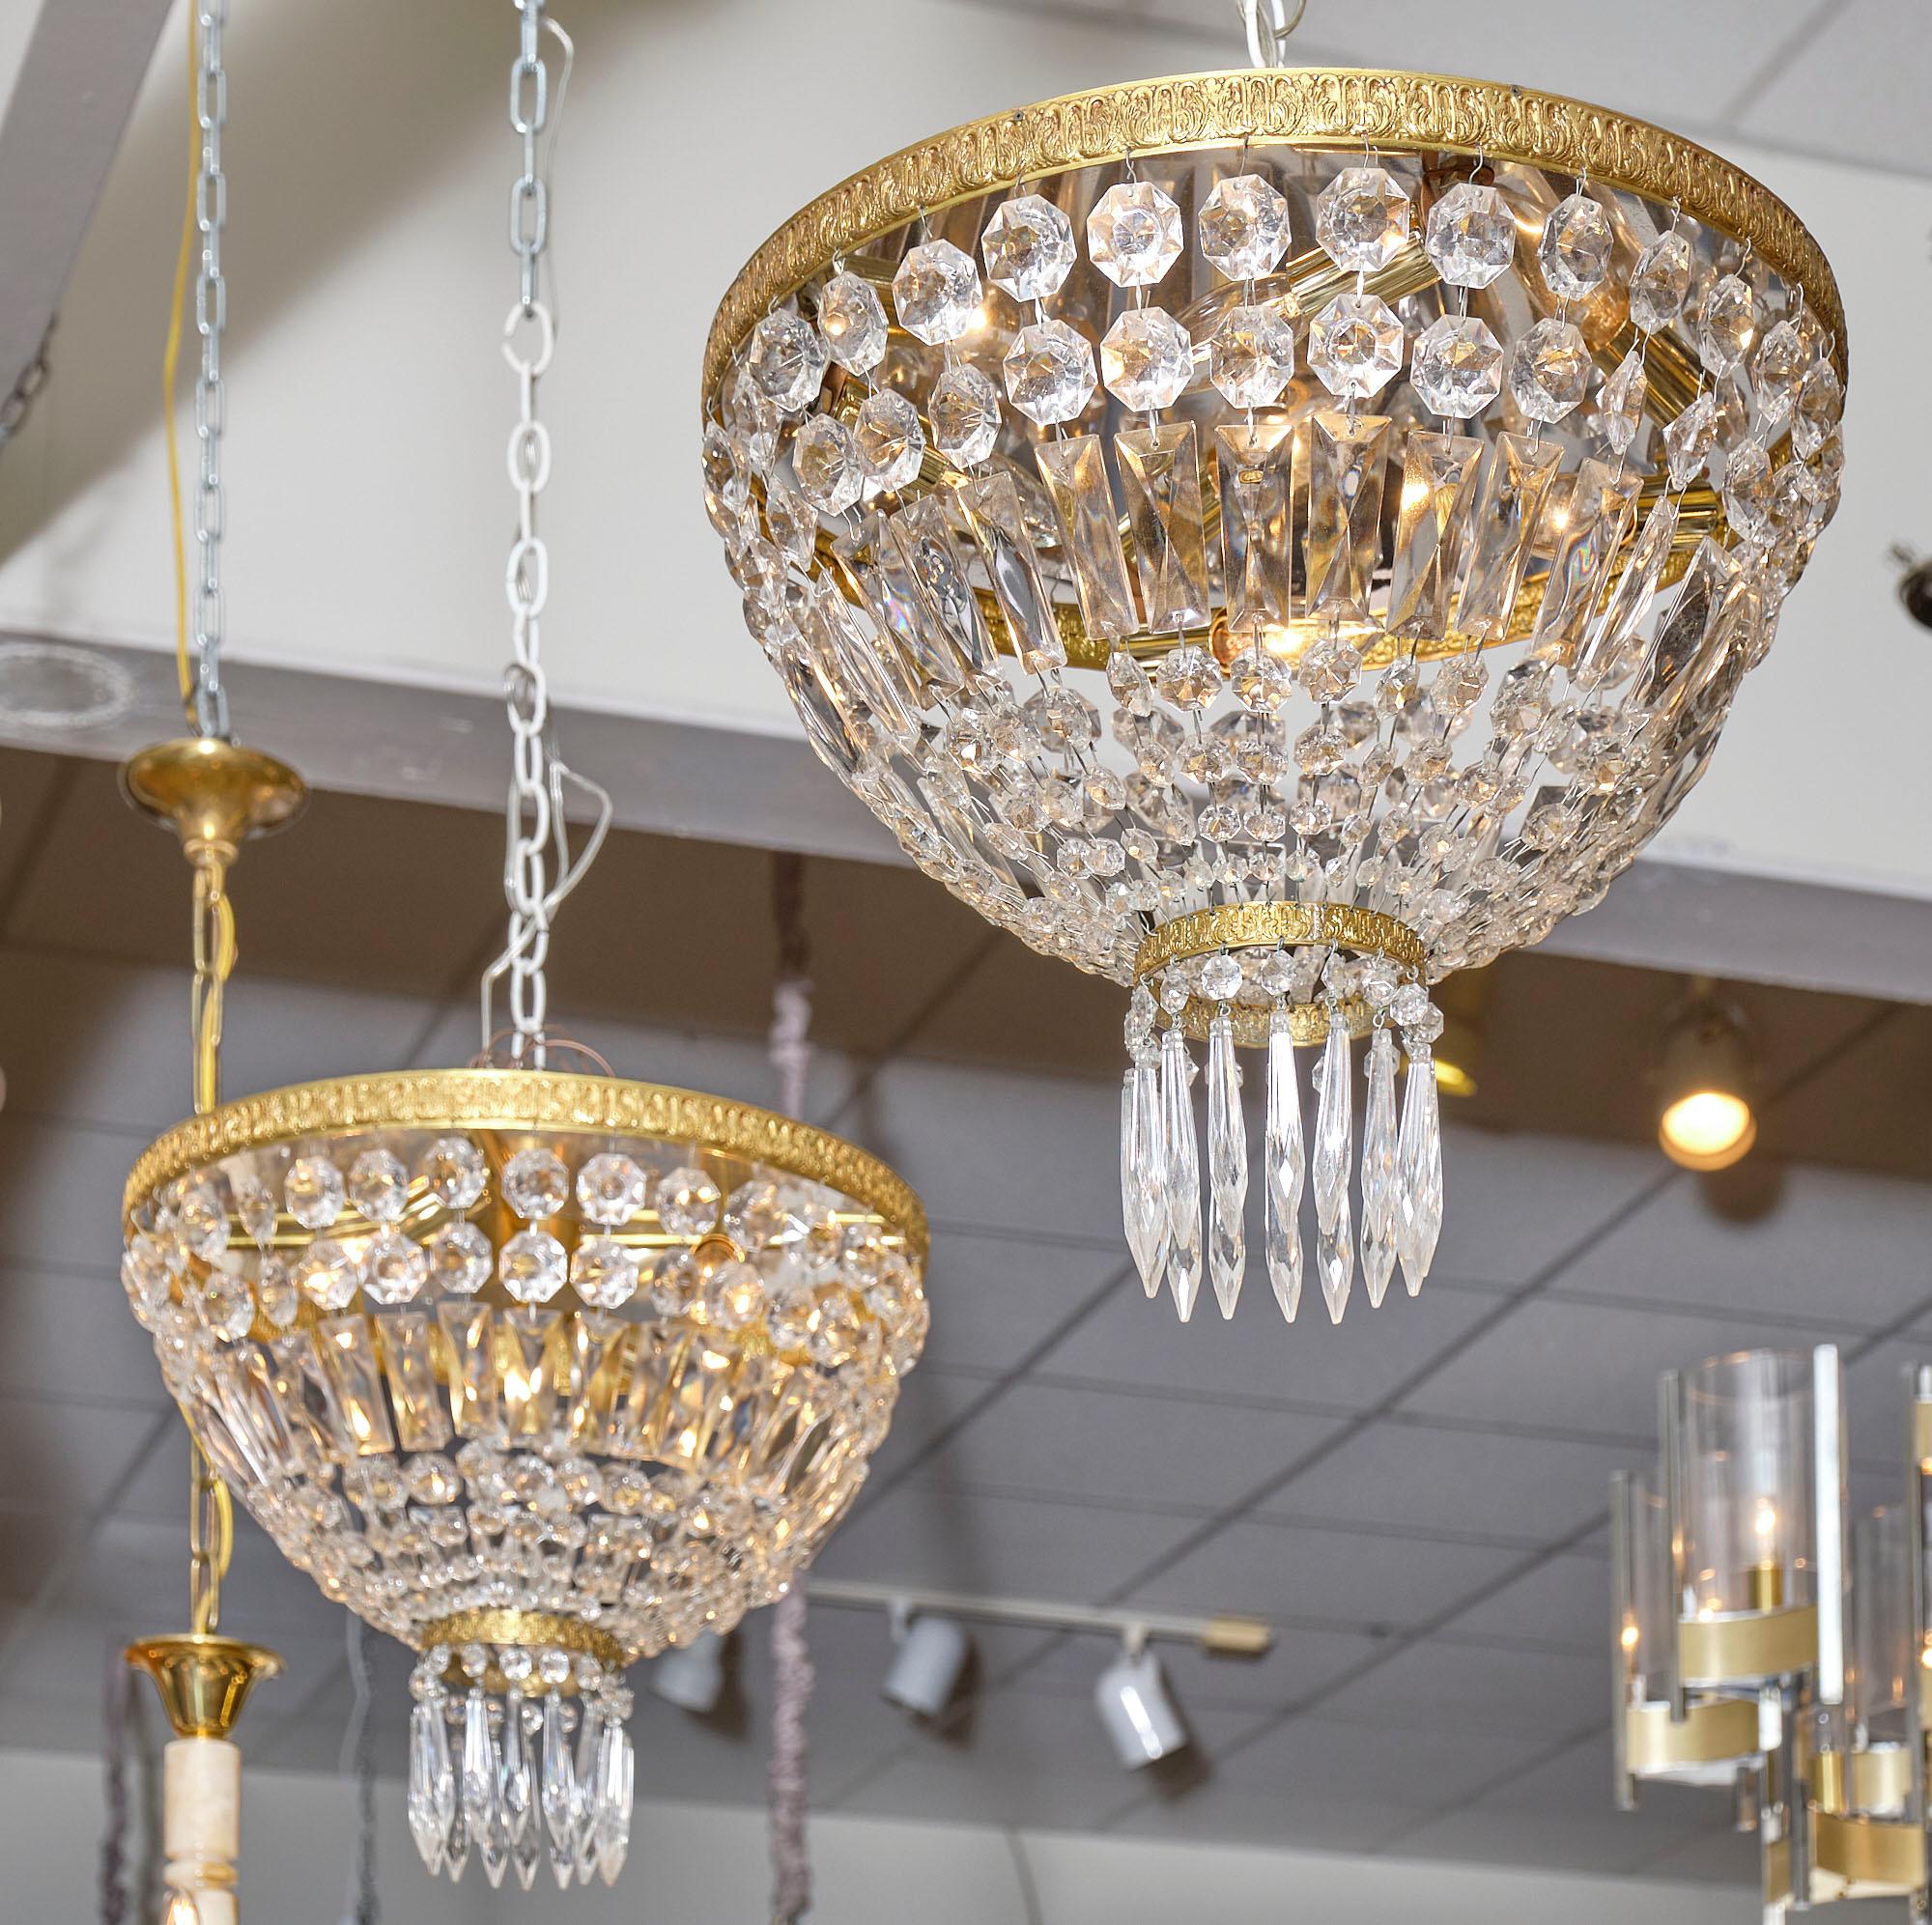 Pair of French crystal chandelier flush mounts made of embossed gilt brass and crystal. The pair features a rich array of cut crystal “cabochons” and pendants. They have been newly wired to fit US standards.